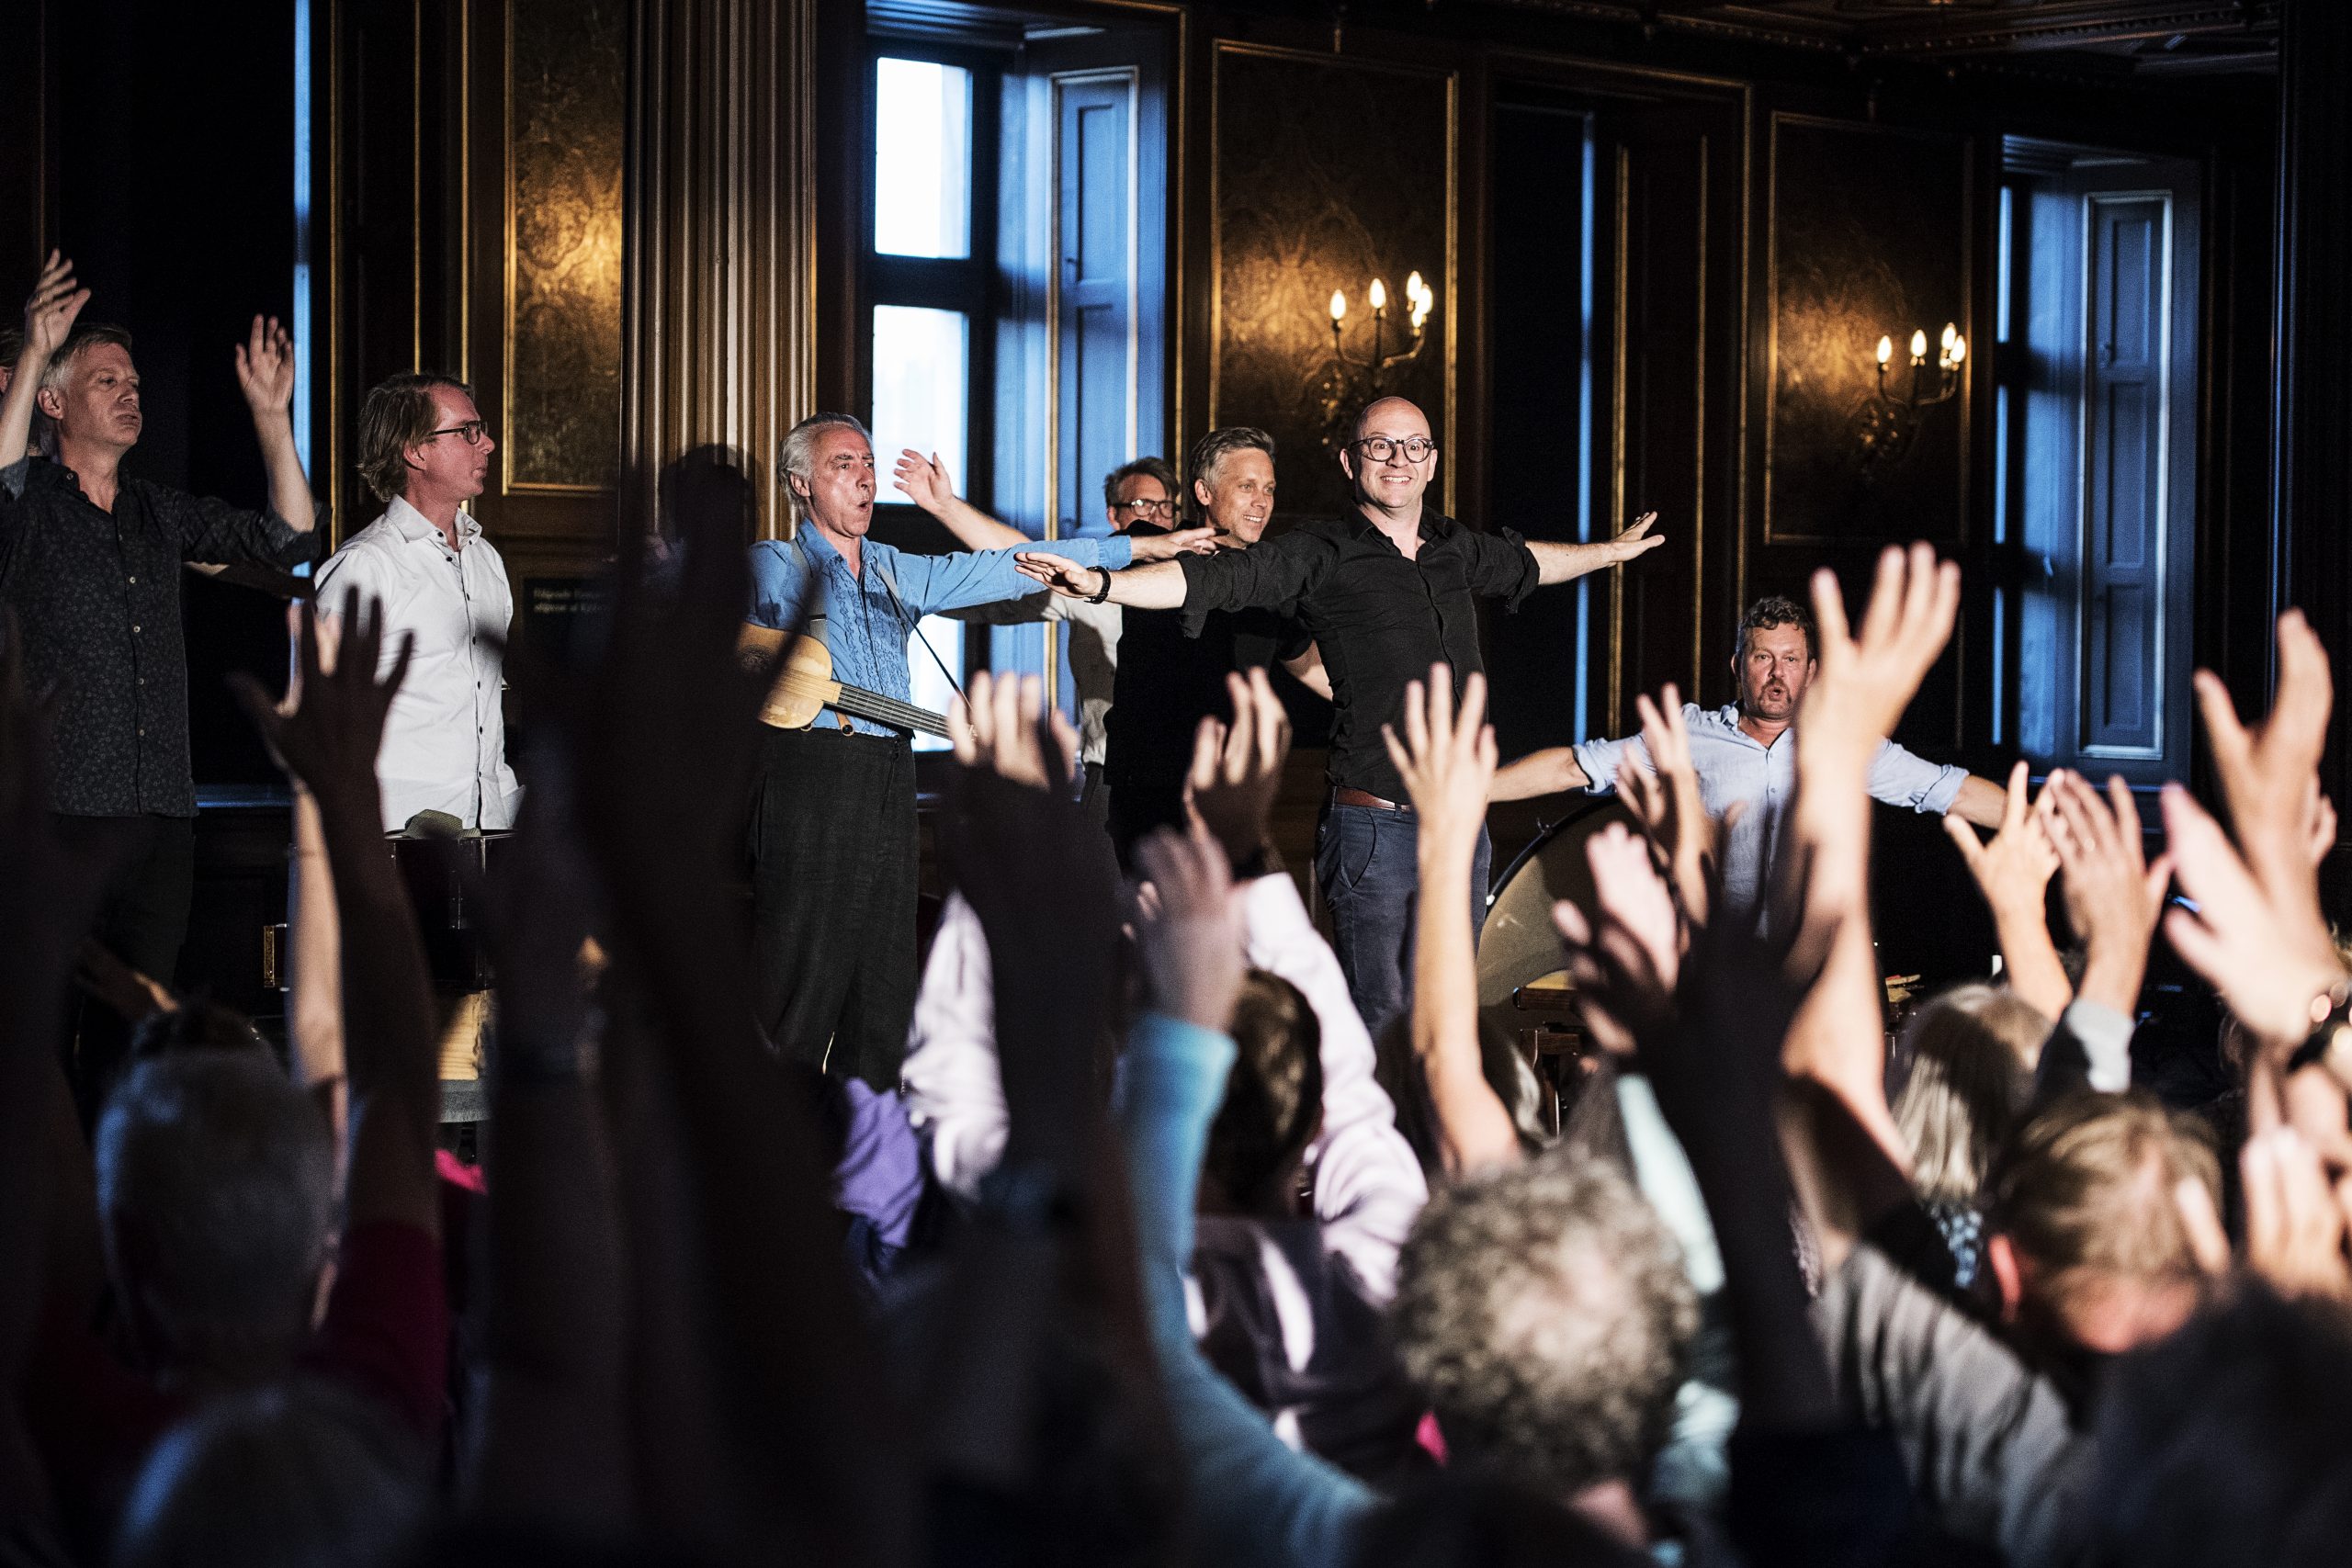 Audience participation during CPH Opera Festival